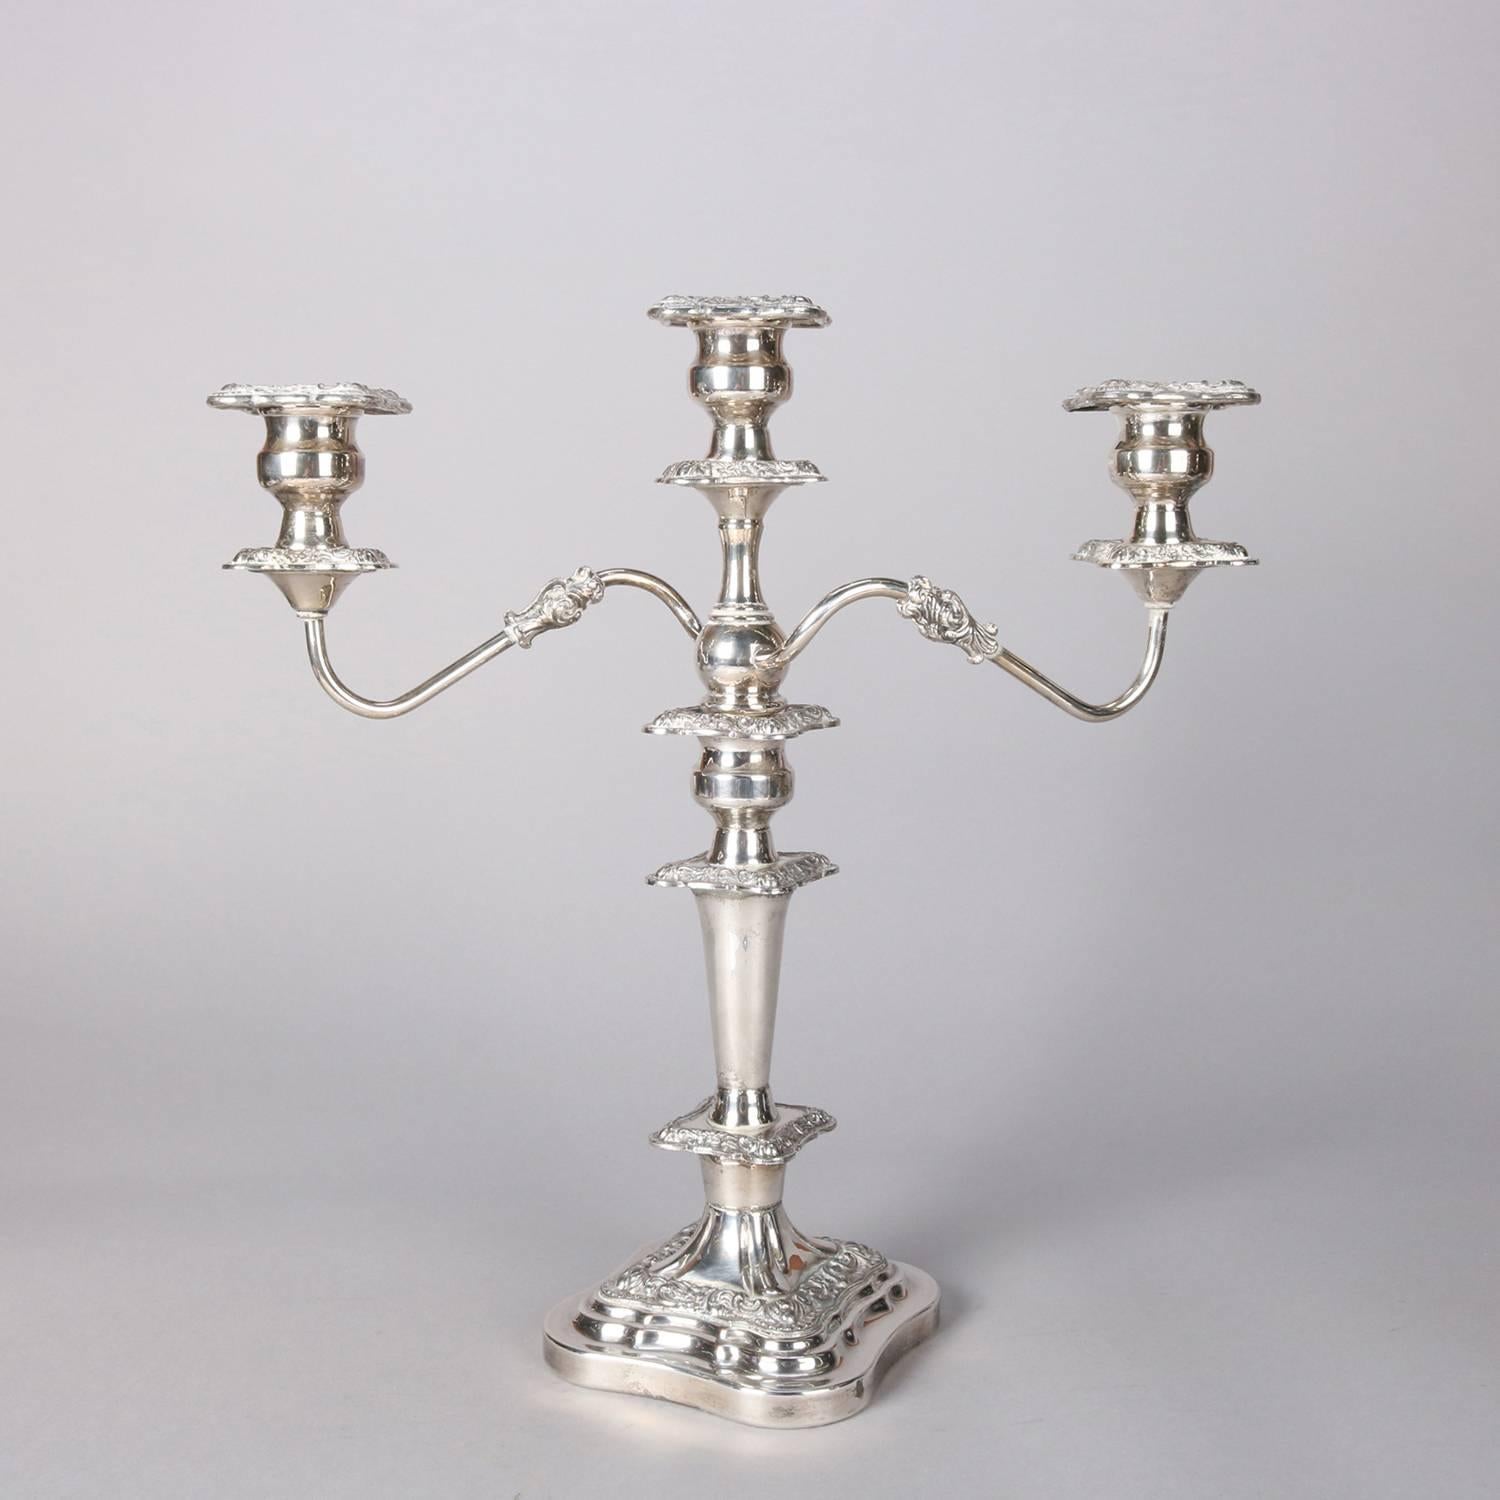 Pair English antique Victorian silver plate candelabra feature floral embossing, each with pair of scroll arms terminating in candle receivers flanking central candle, crown hallmark on base, c1900

Measure - 18